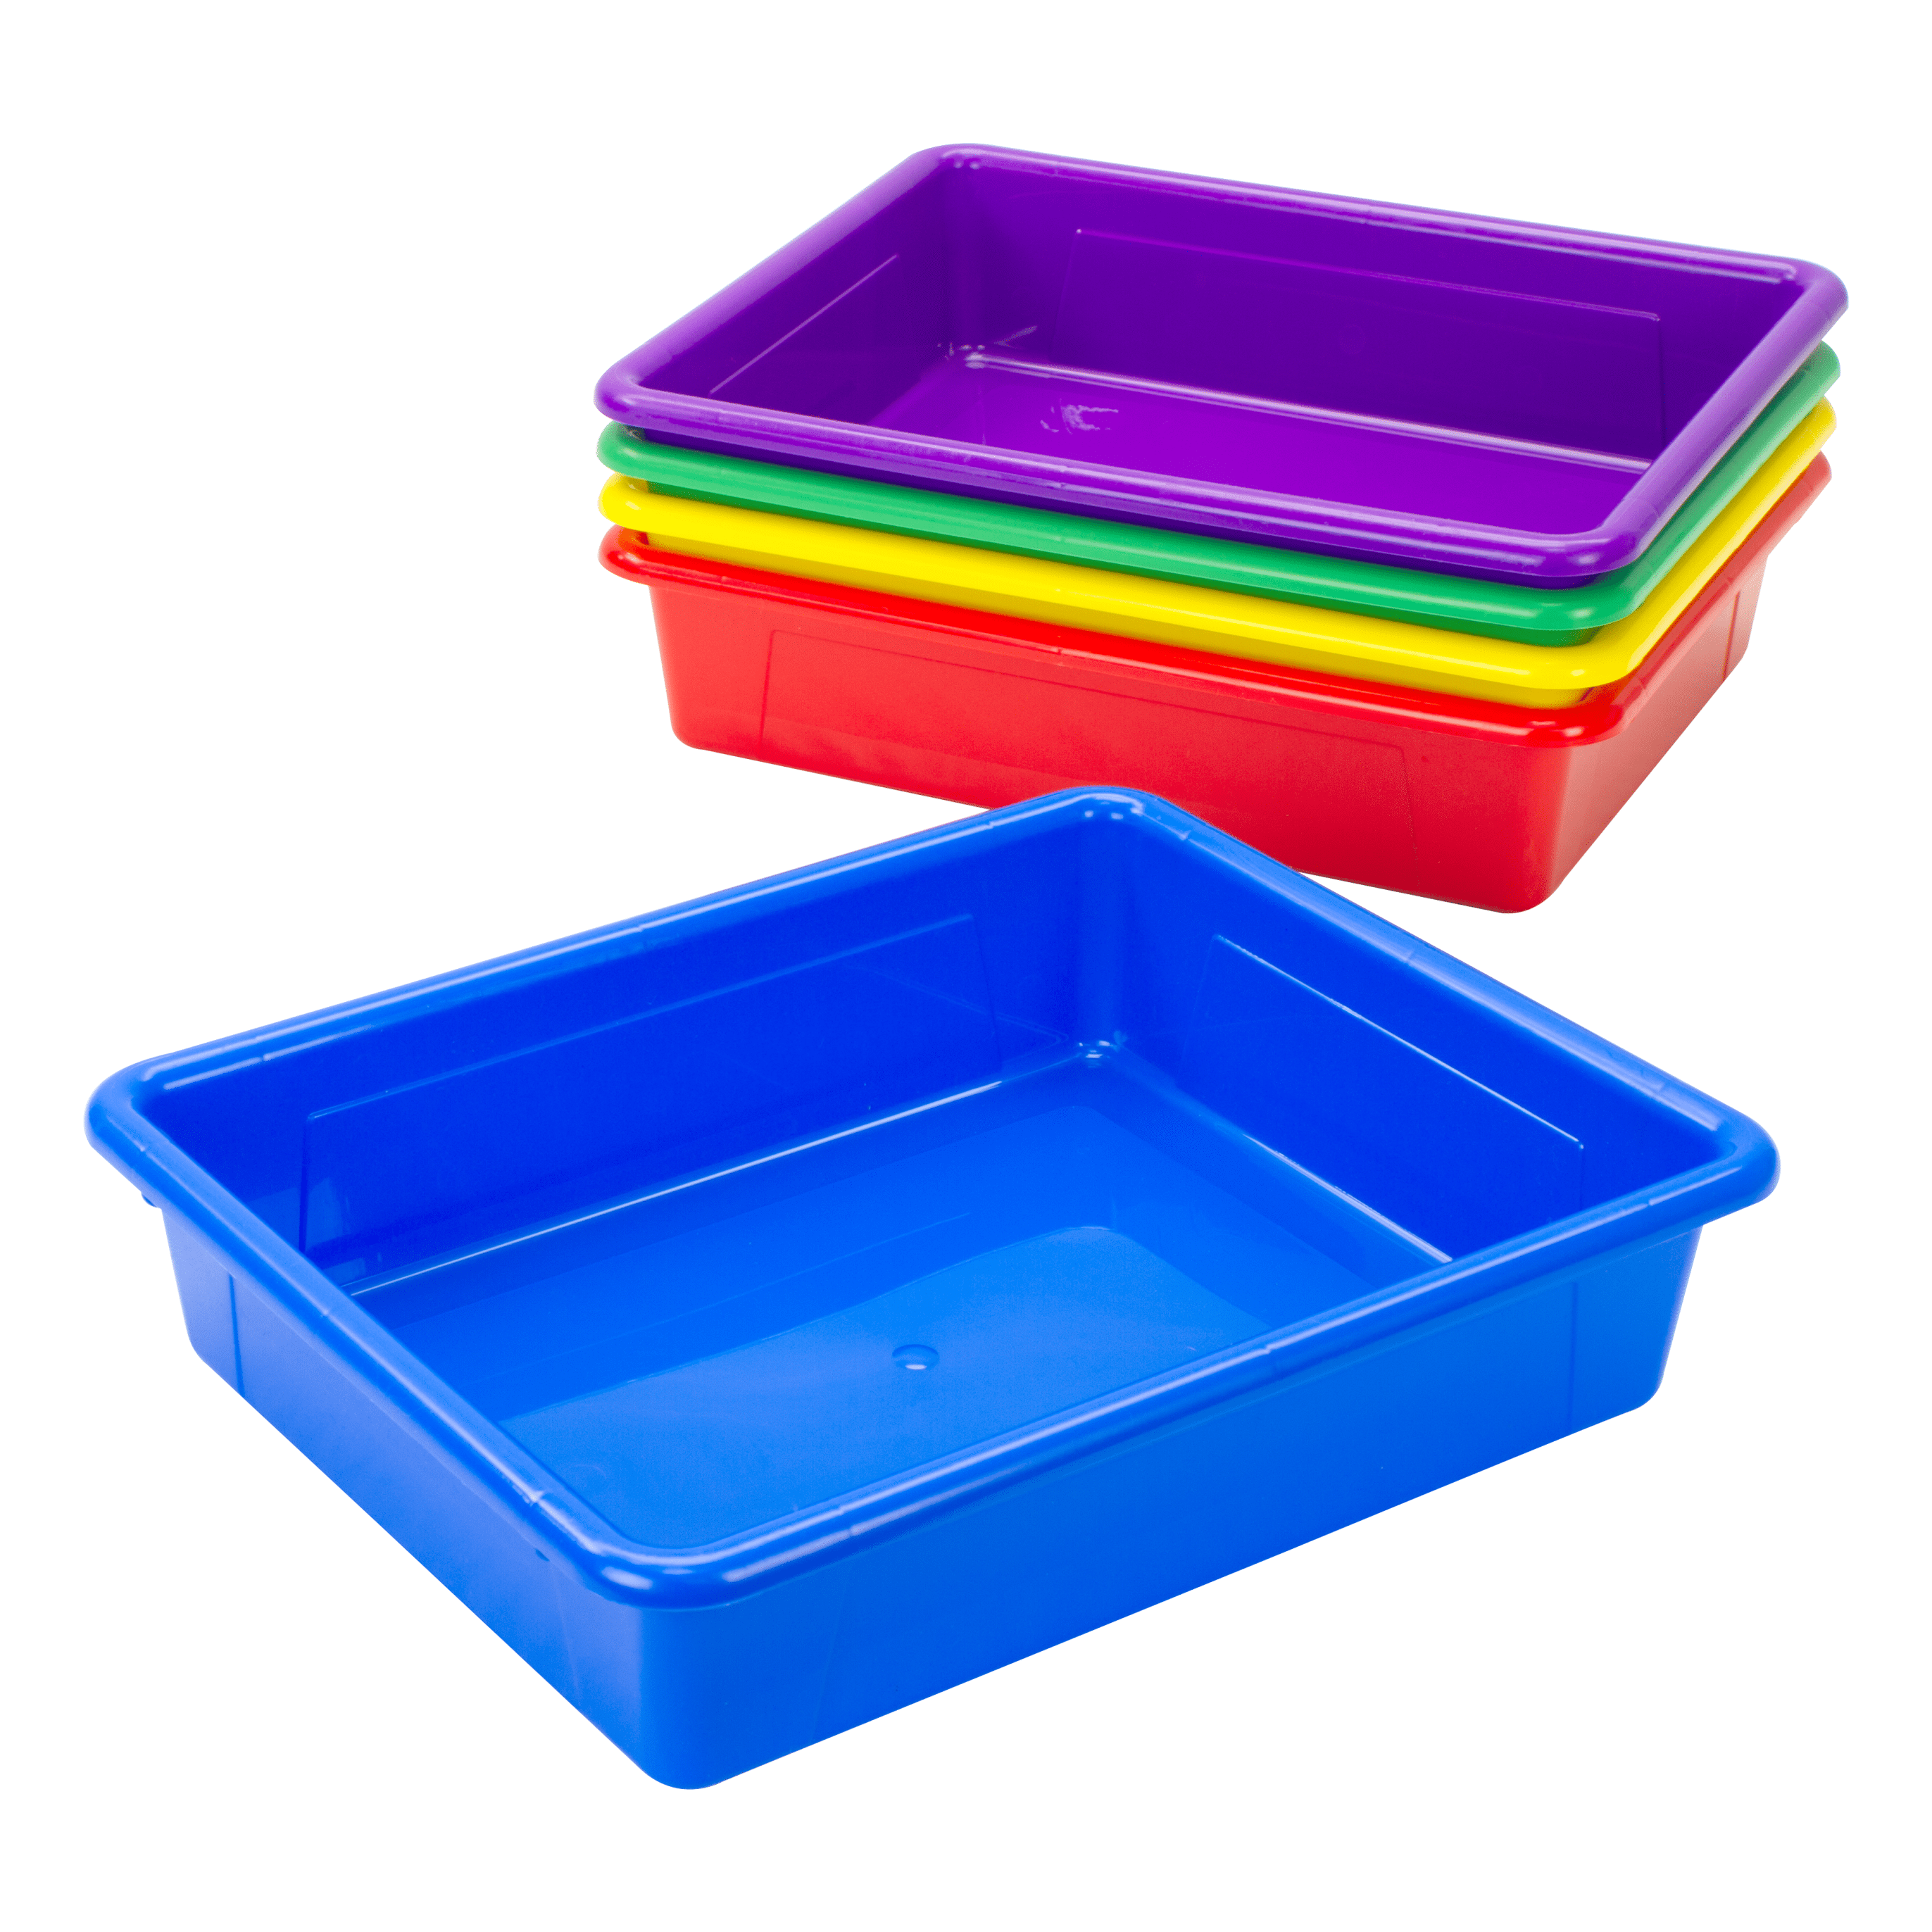 Storex Letter Size Flat Storage Tray – Organizer Bin for Classroom, Office and Home, Clear, 5-Pack (62531A05C), 10 x 13 x 3 Inches